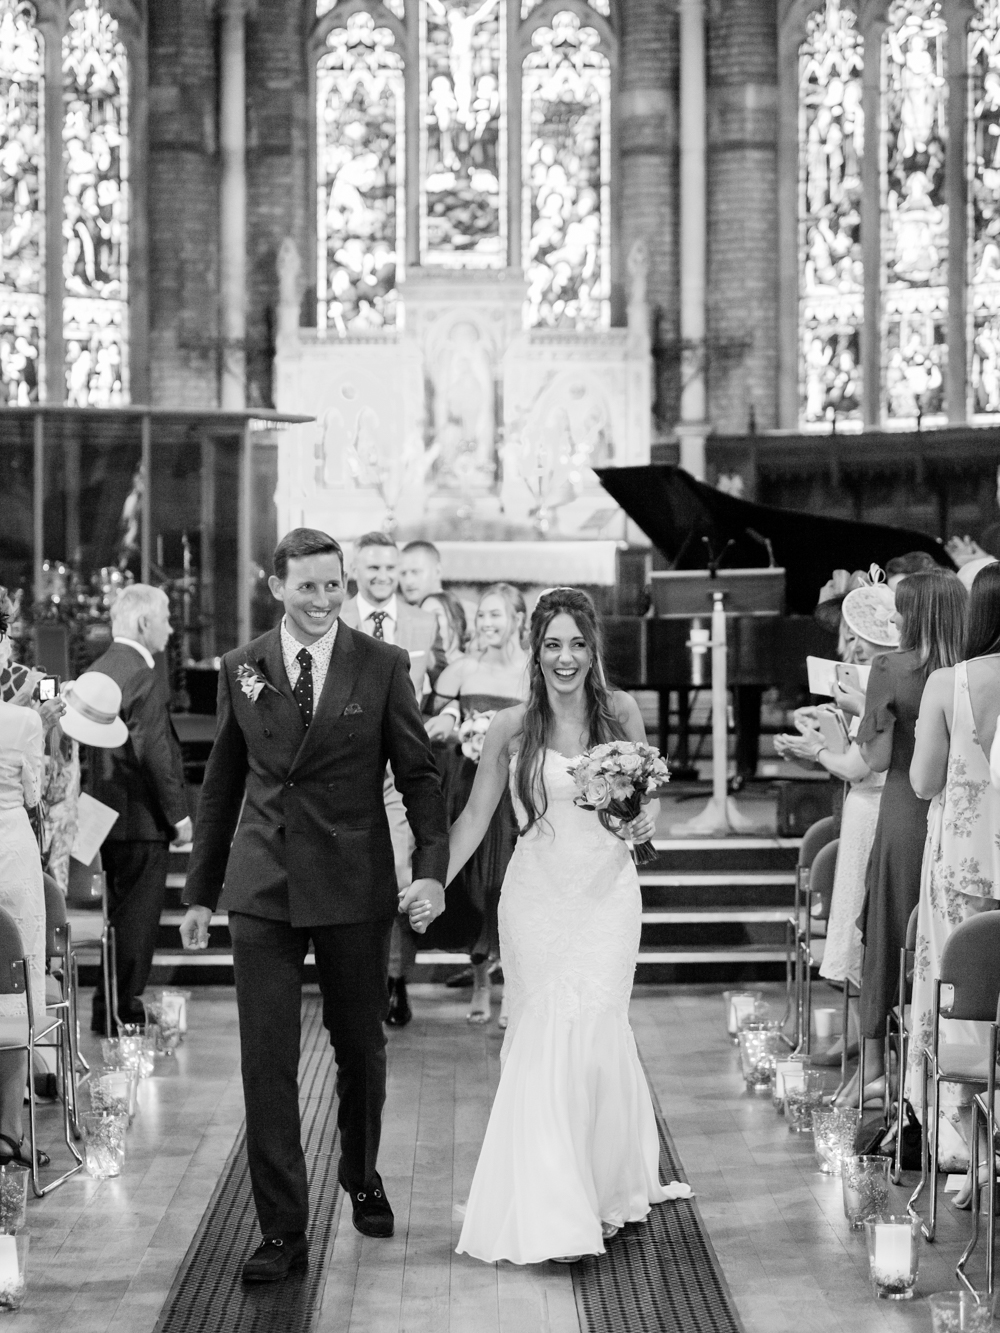 Black and White image of Bride and Groom holding hands walking down the aisle